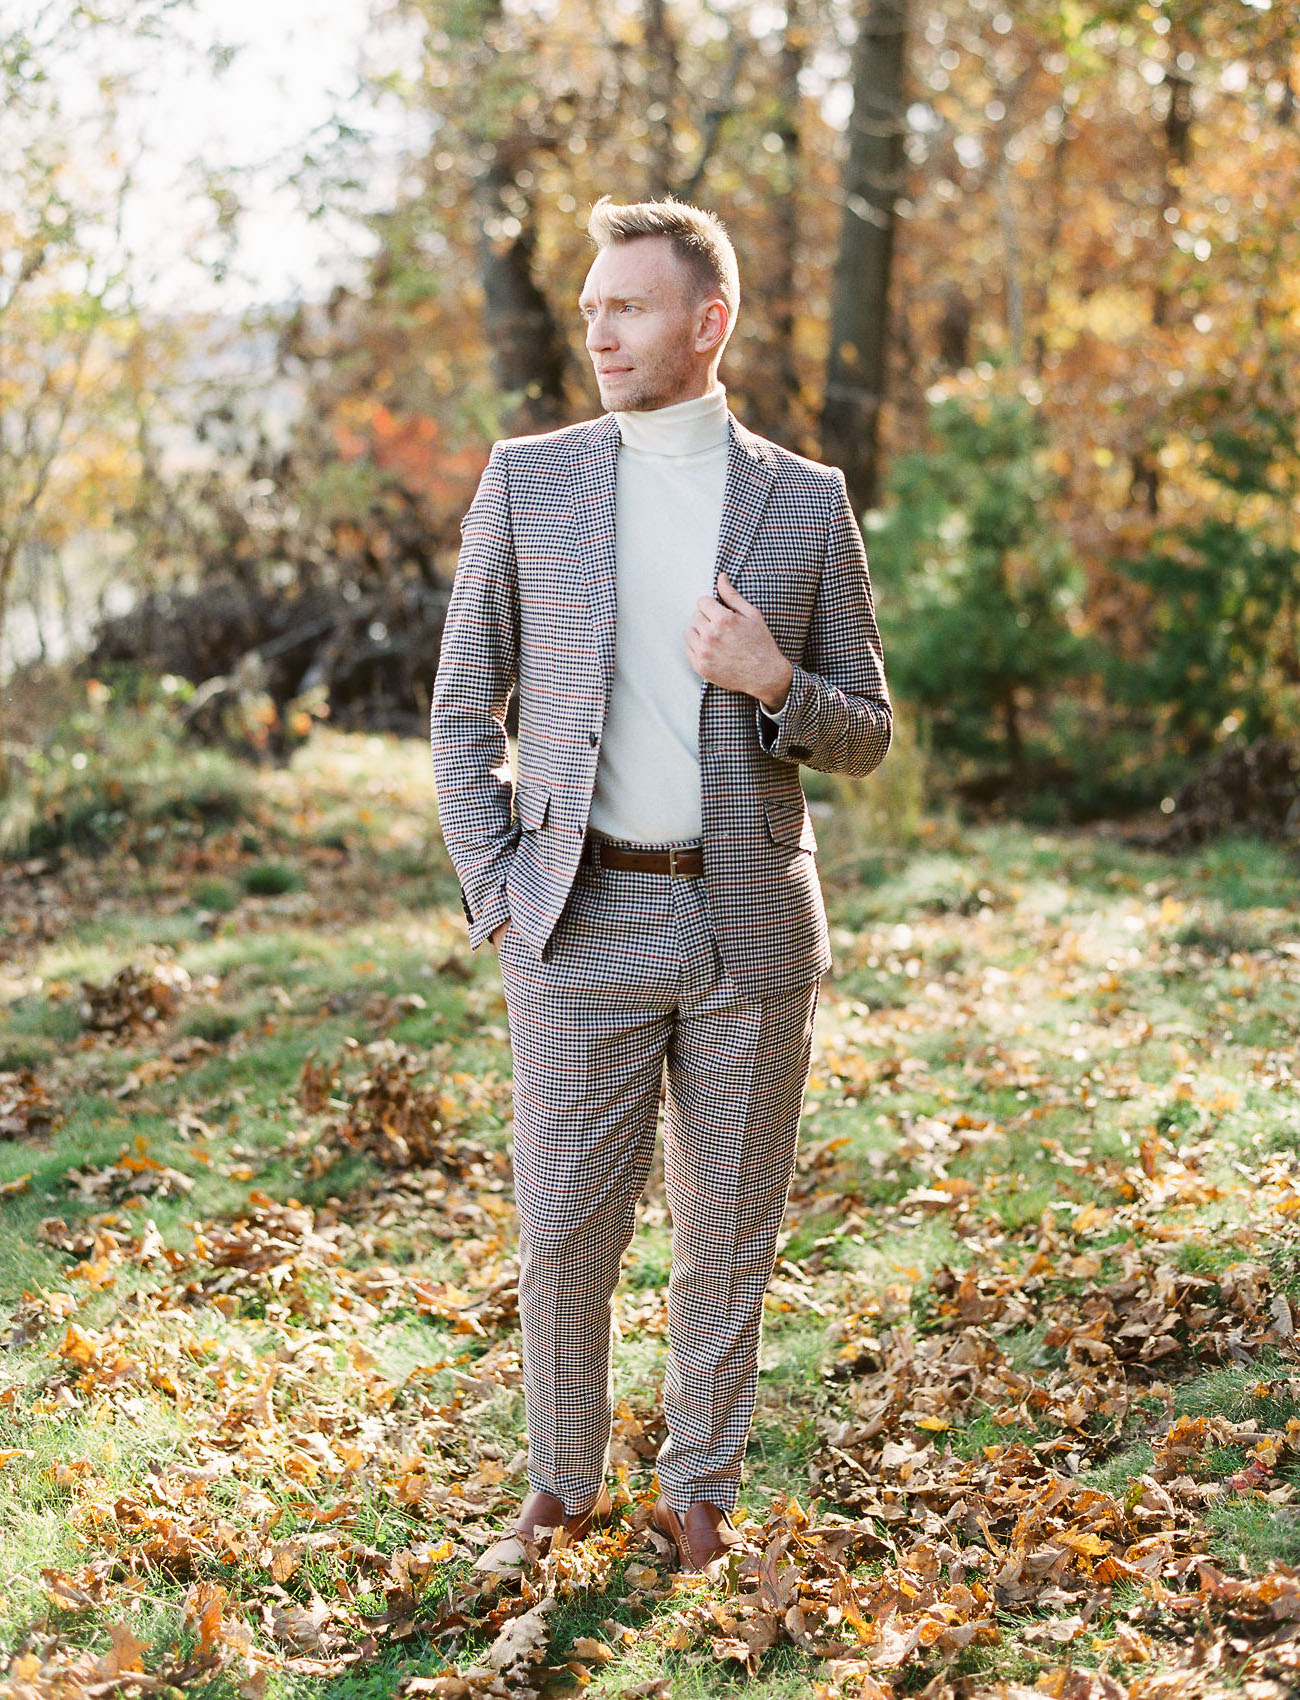 The groom was wearing a plaid suit, a neutral turtleneck and brown shoes